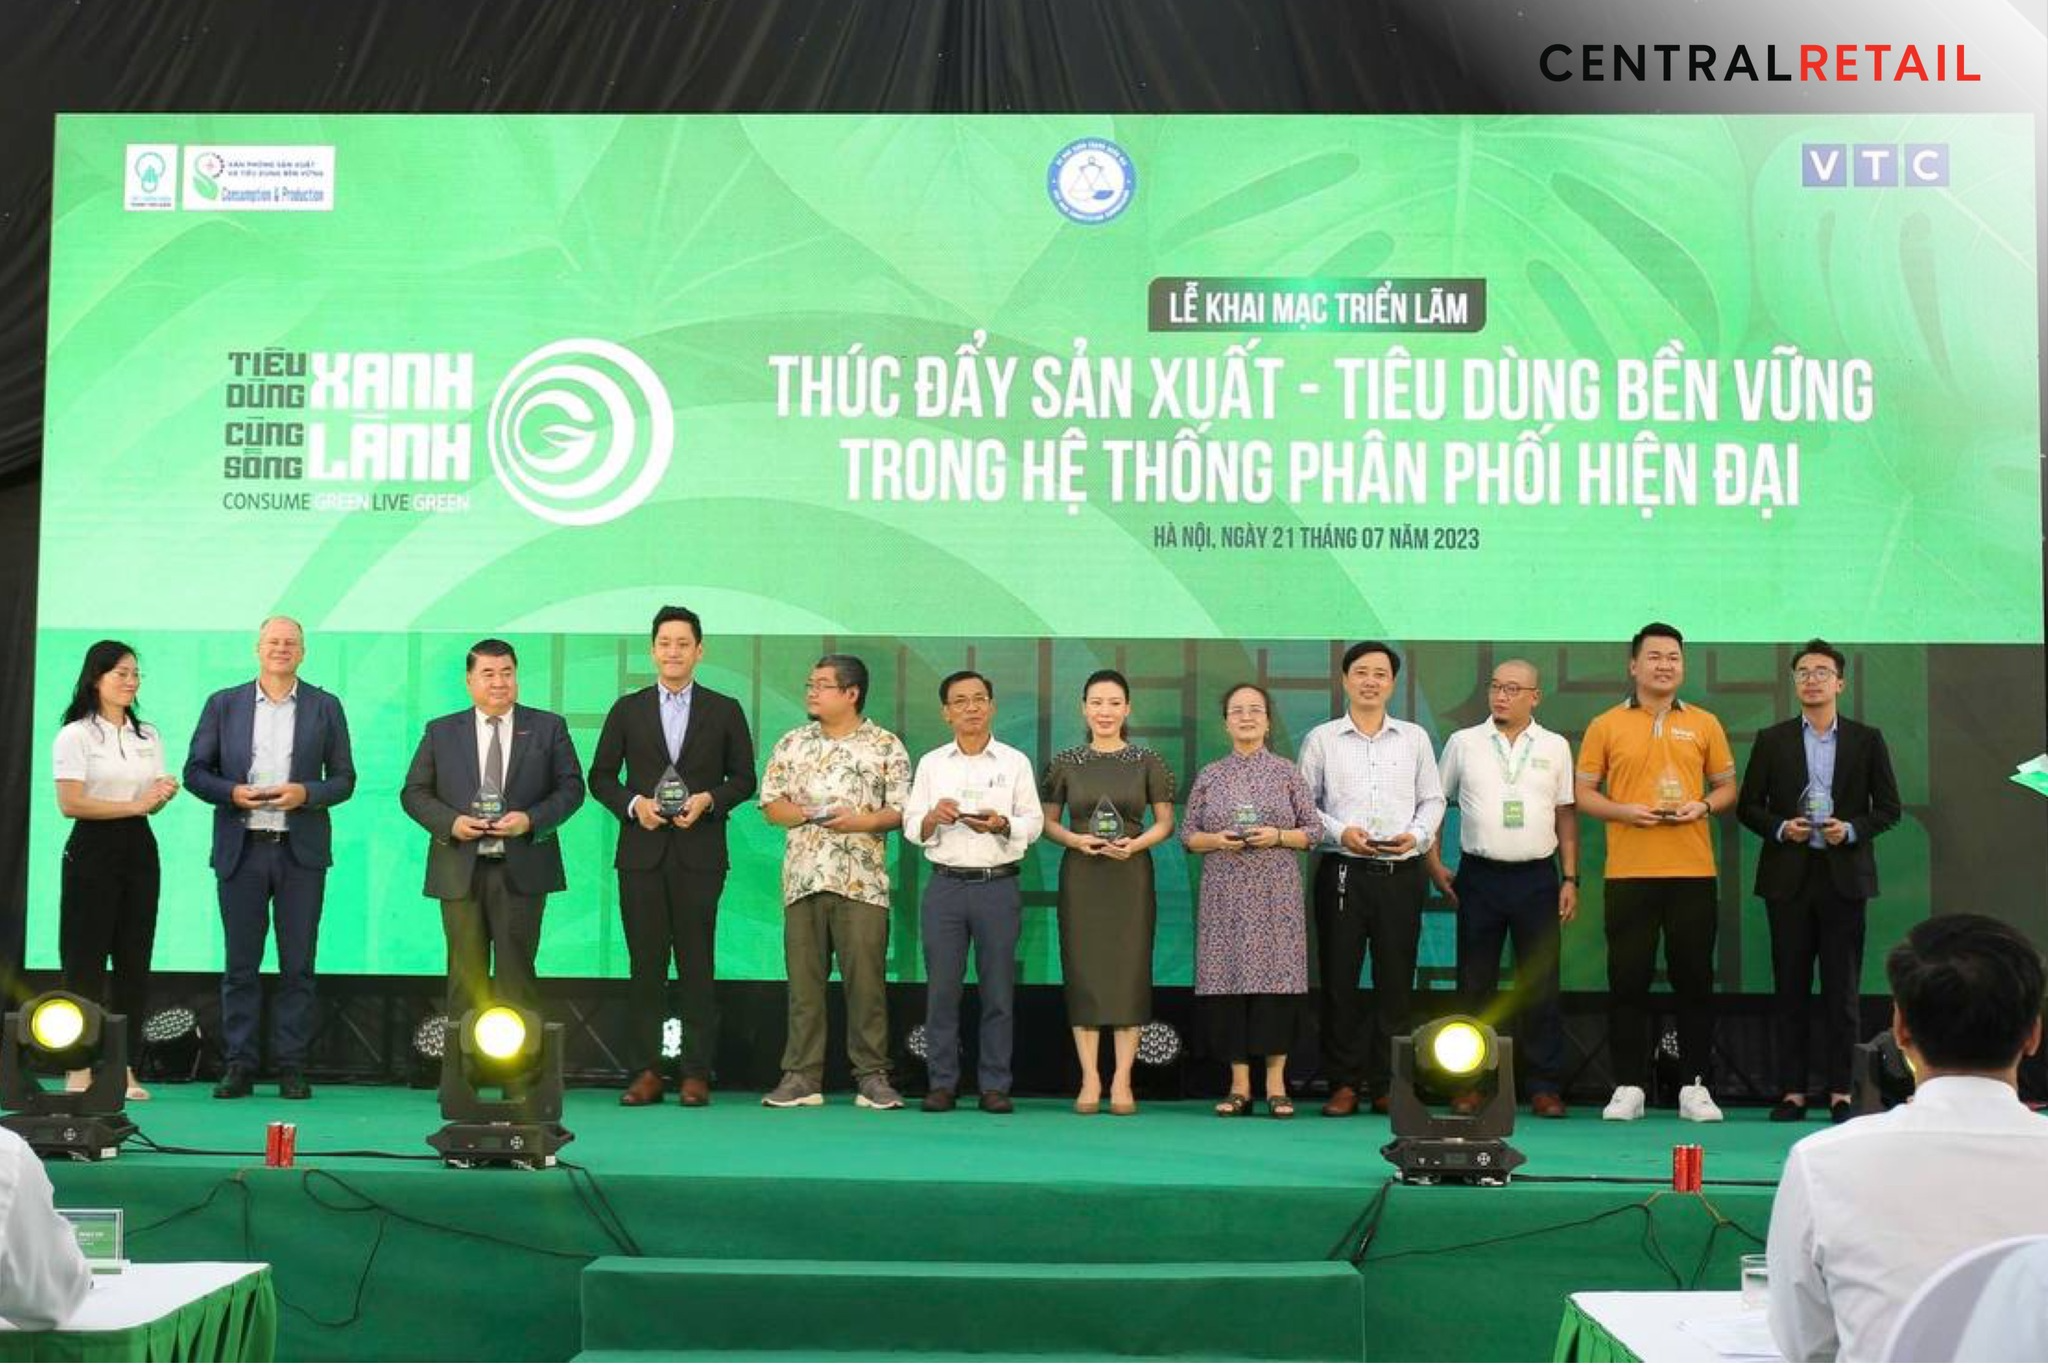 Central Retail in Vietnam attends the kick-off ceremony for the event “Promoting Sustainable Production and Consumption in the Modern Distribution System”